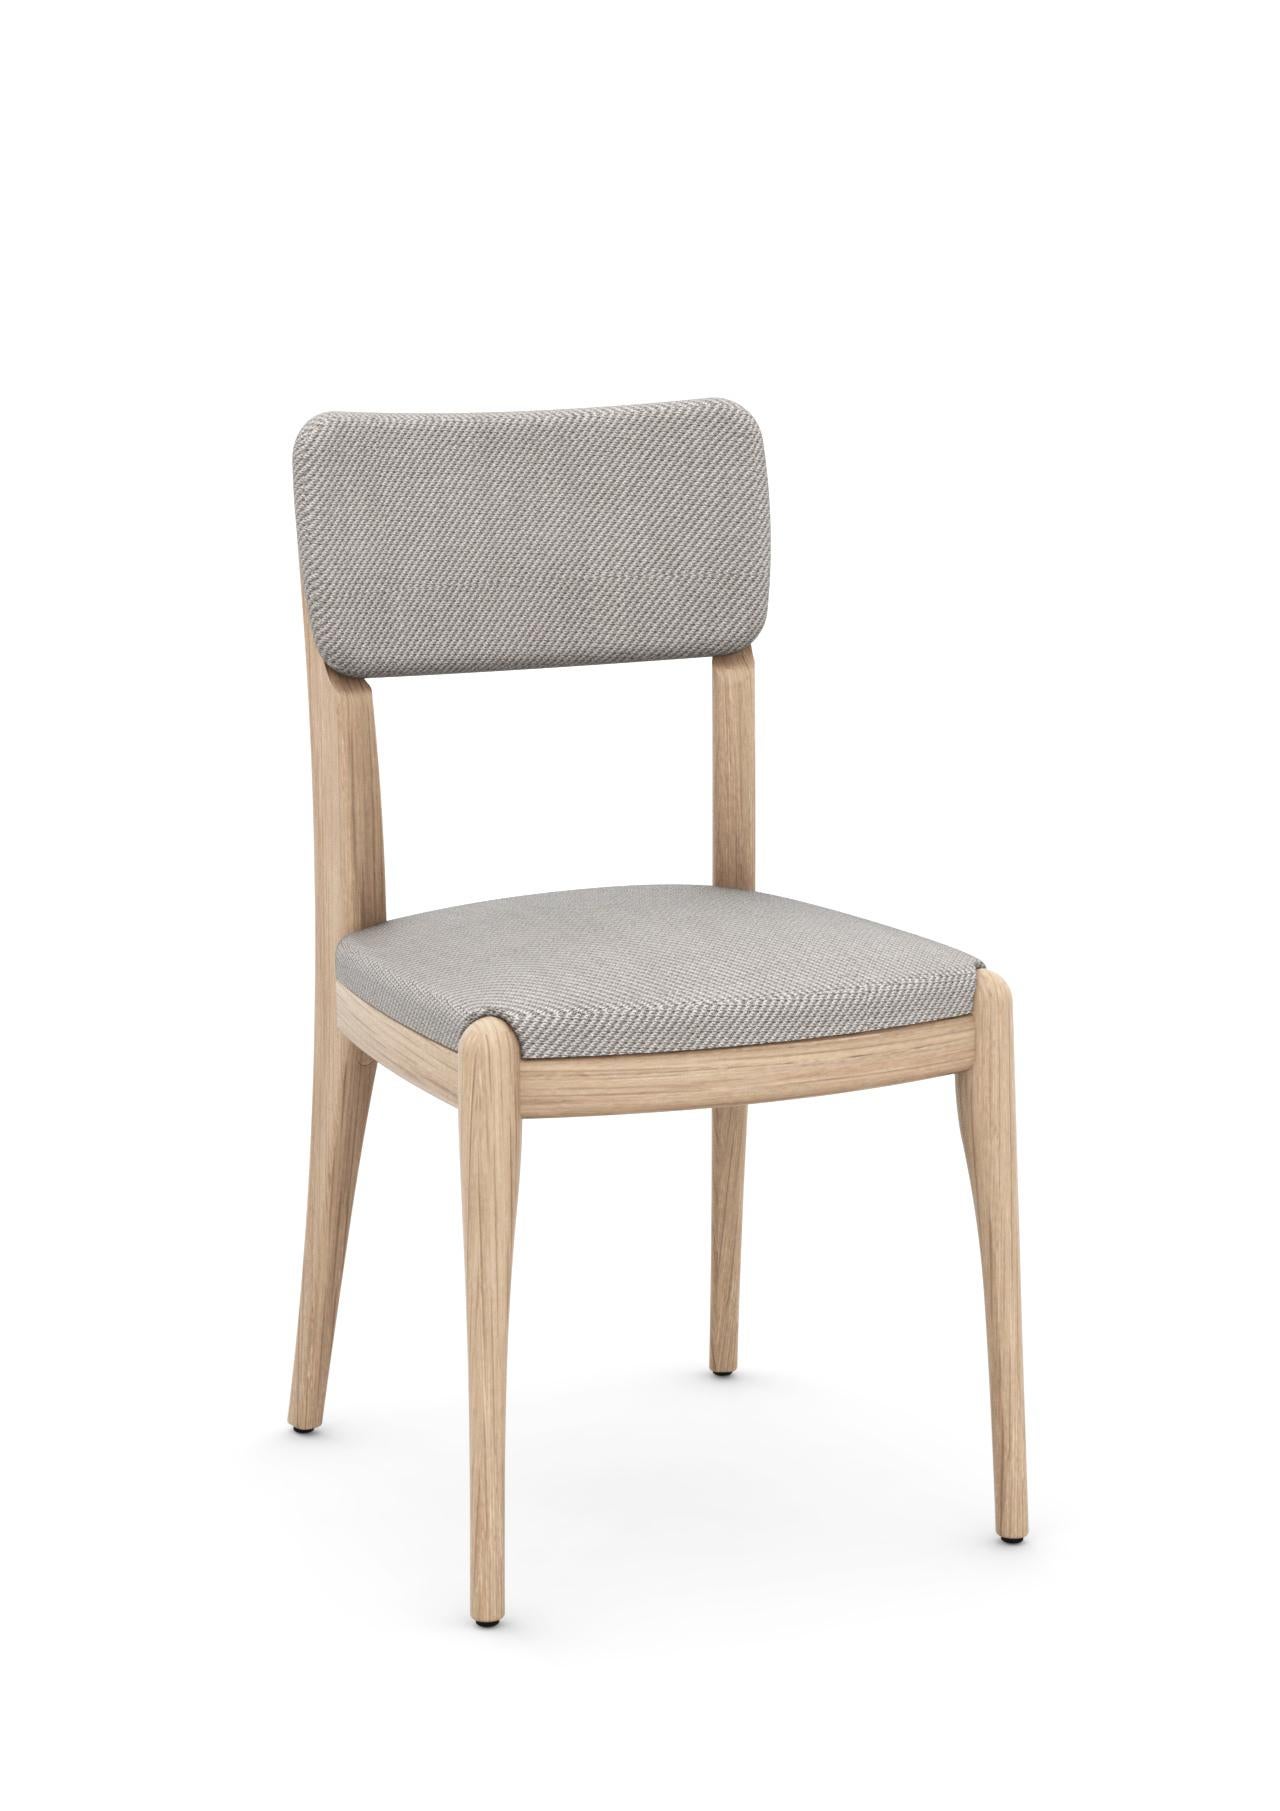 Finchdean is designed by Sjoerd Vroonland & Casper Vissers for Revised
The Finchdean dining chair is crafted from solid wood with a polyurethane foam seat and backrest upholstered in multiple fabric options. The backrest features powdercoated bolts.